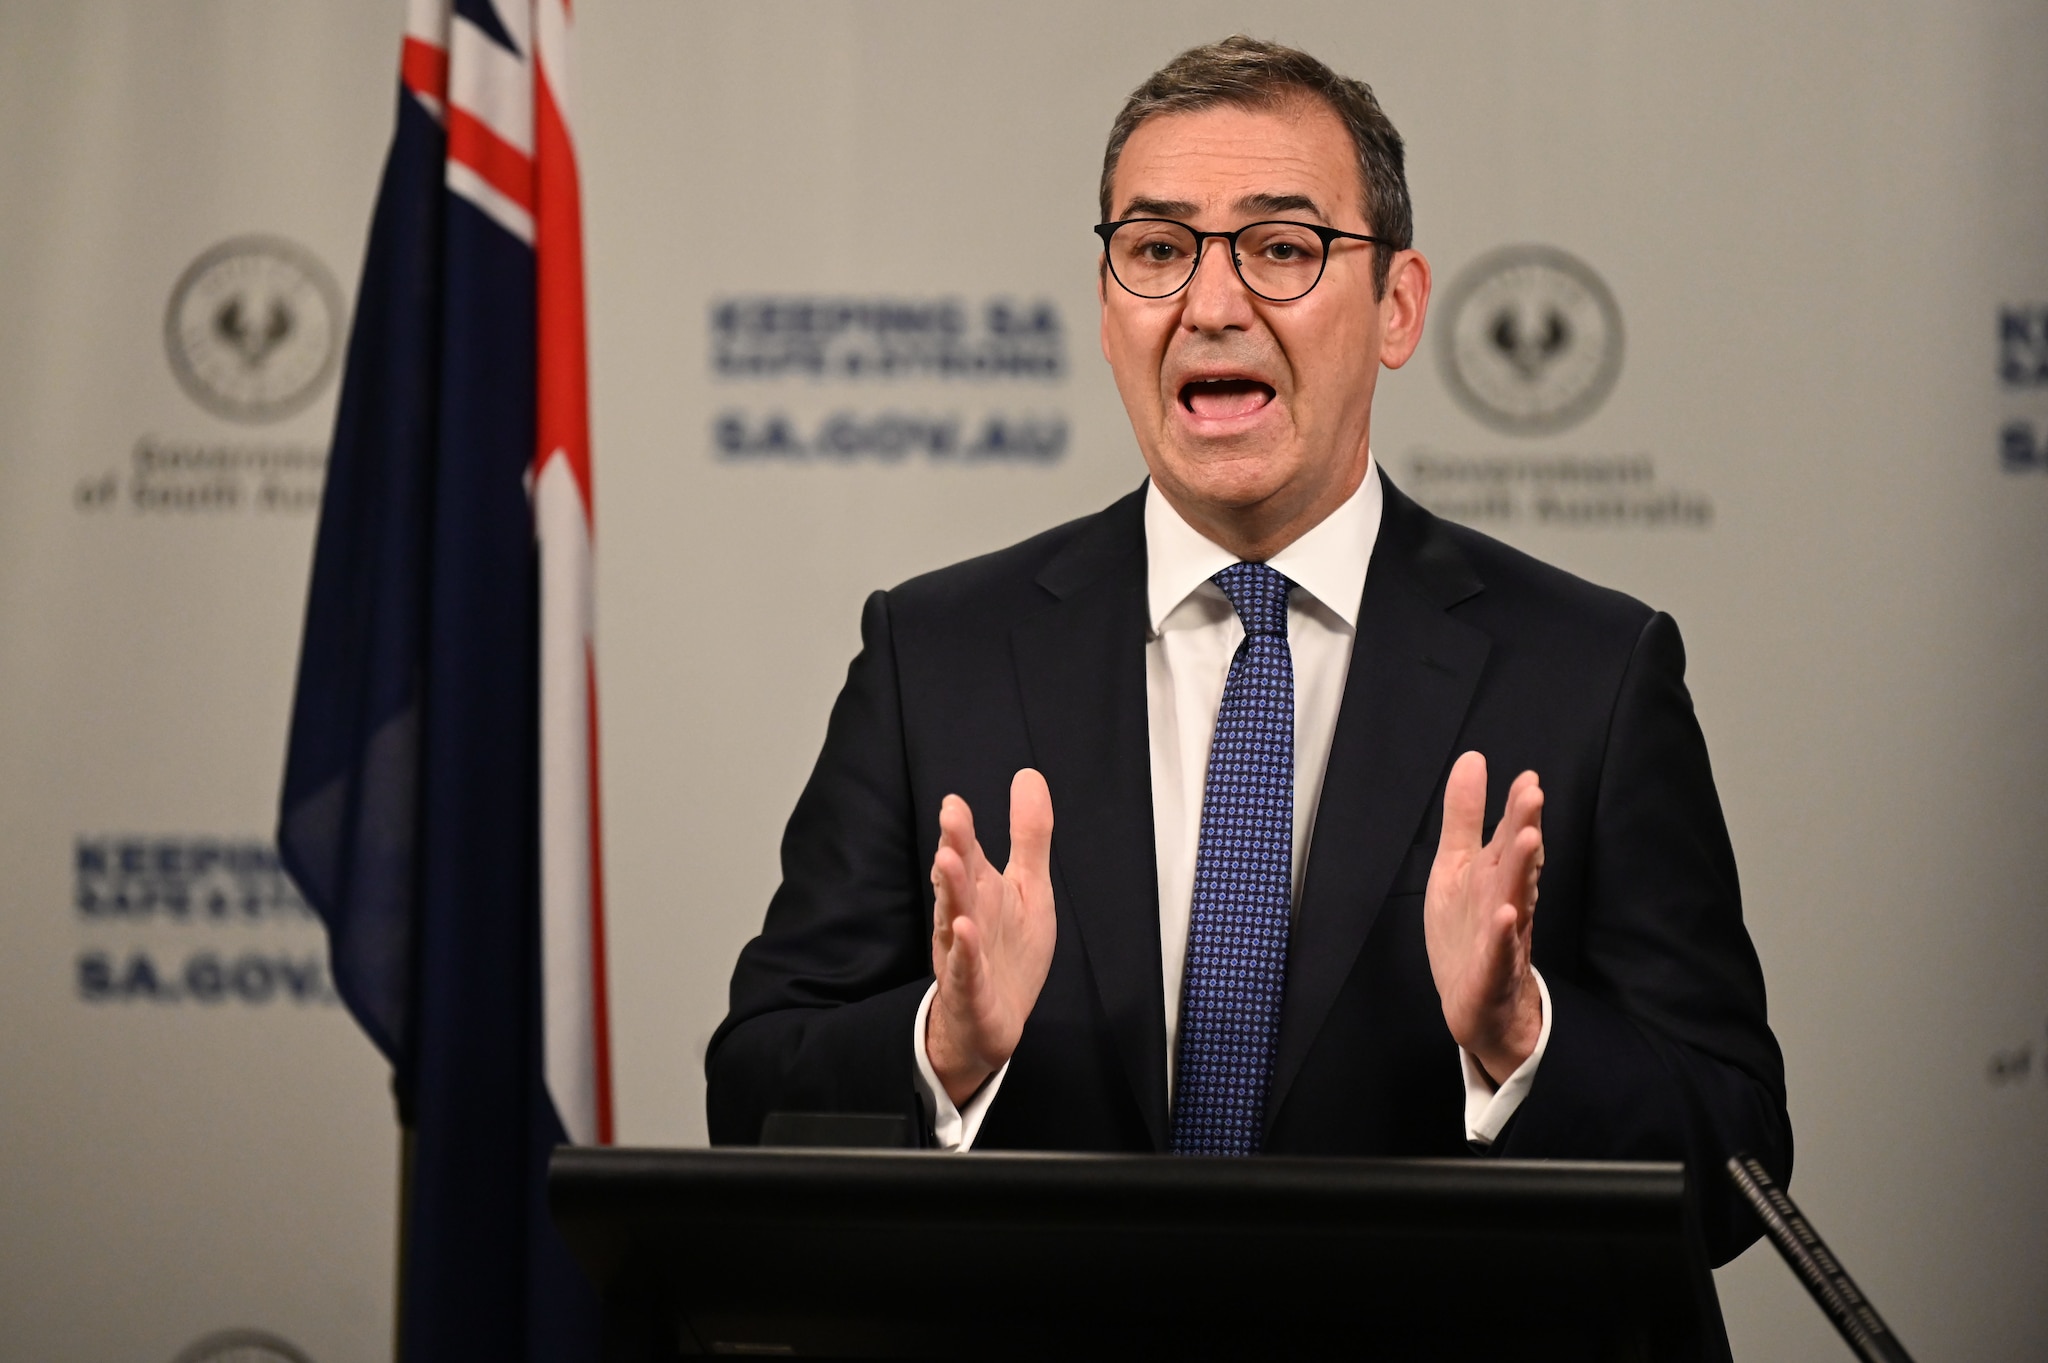 South Australia Premier Steven Marshall speaks to the media during a press conference in Adelaide.